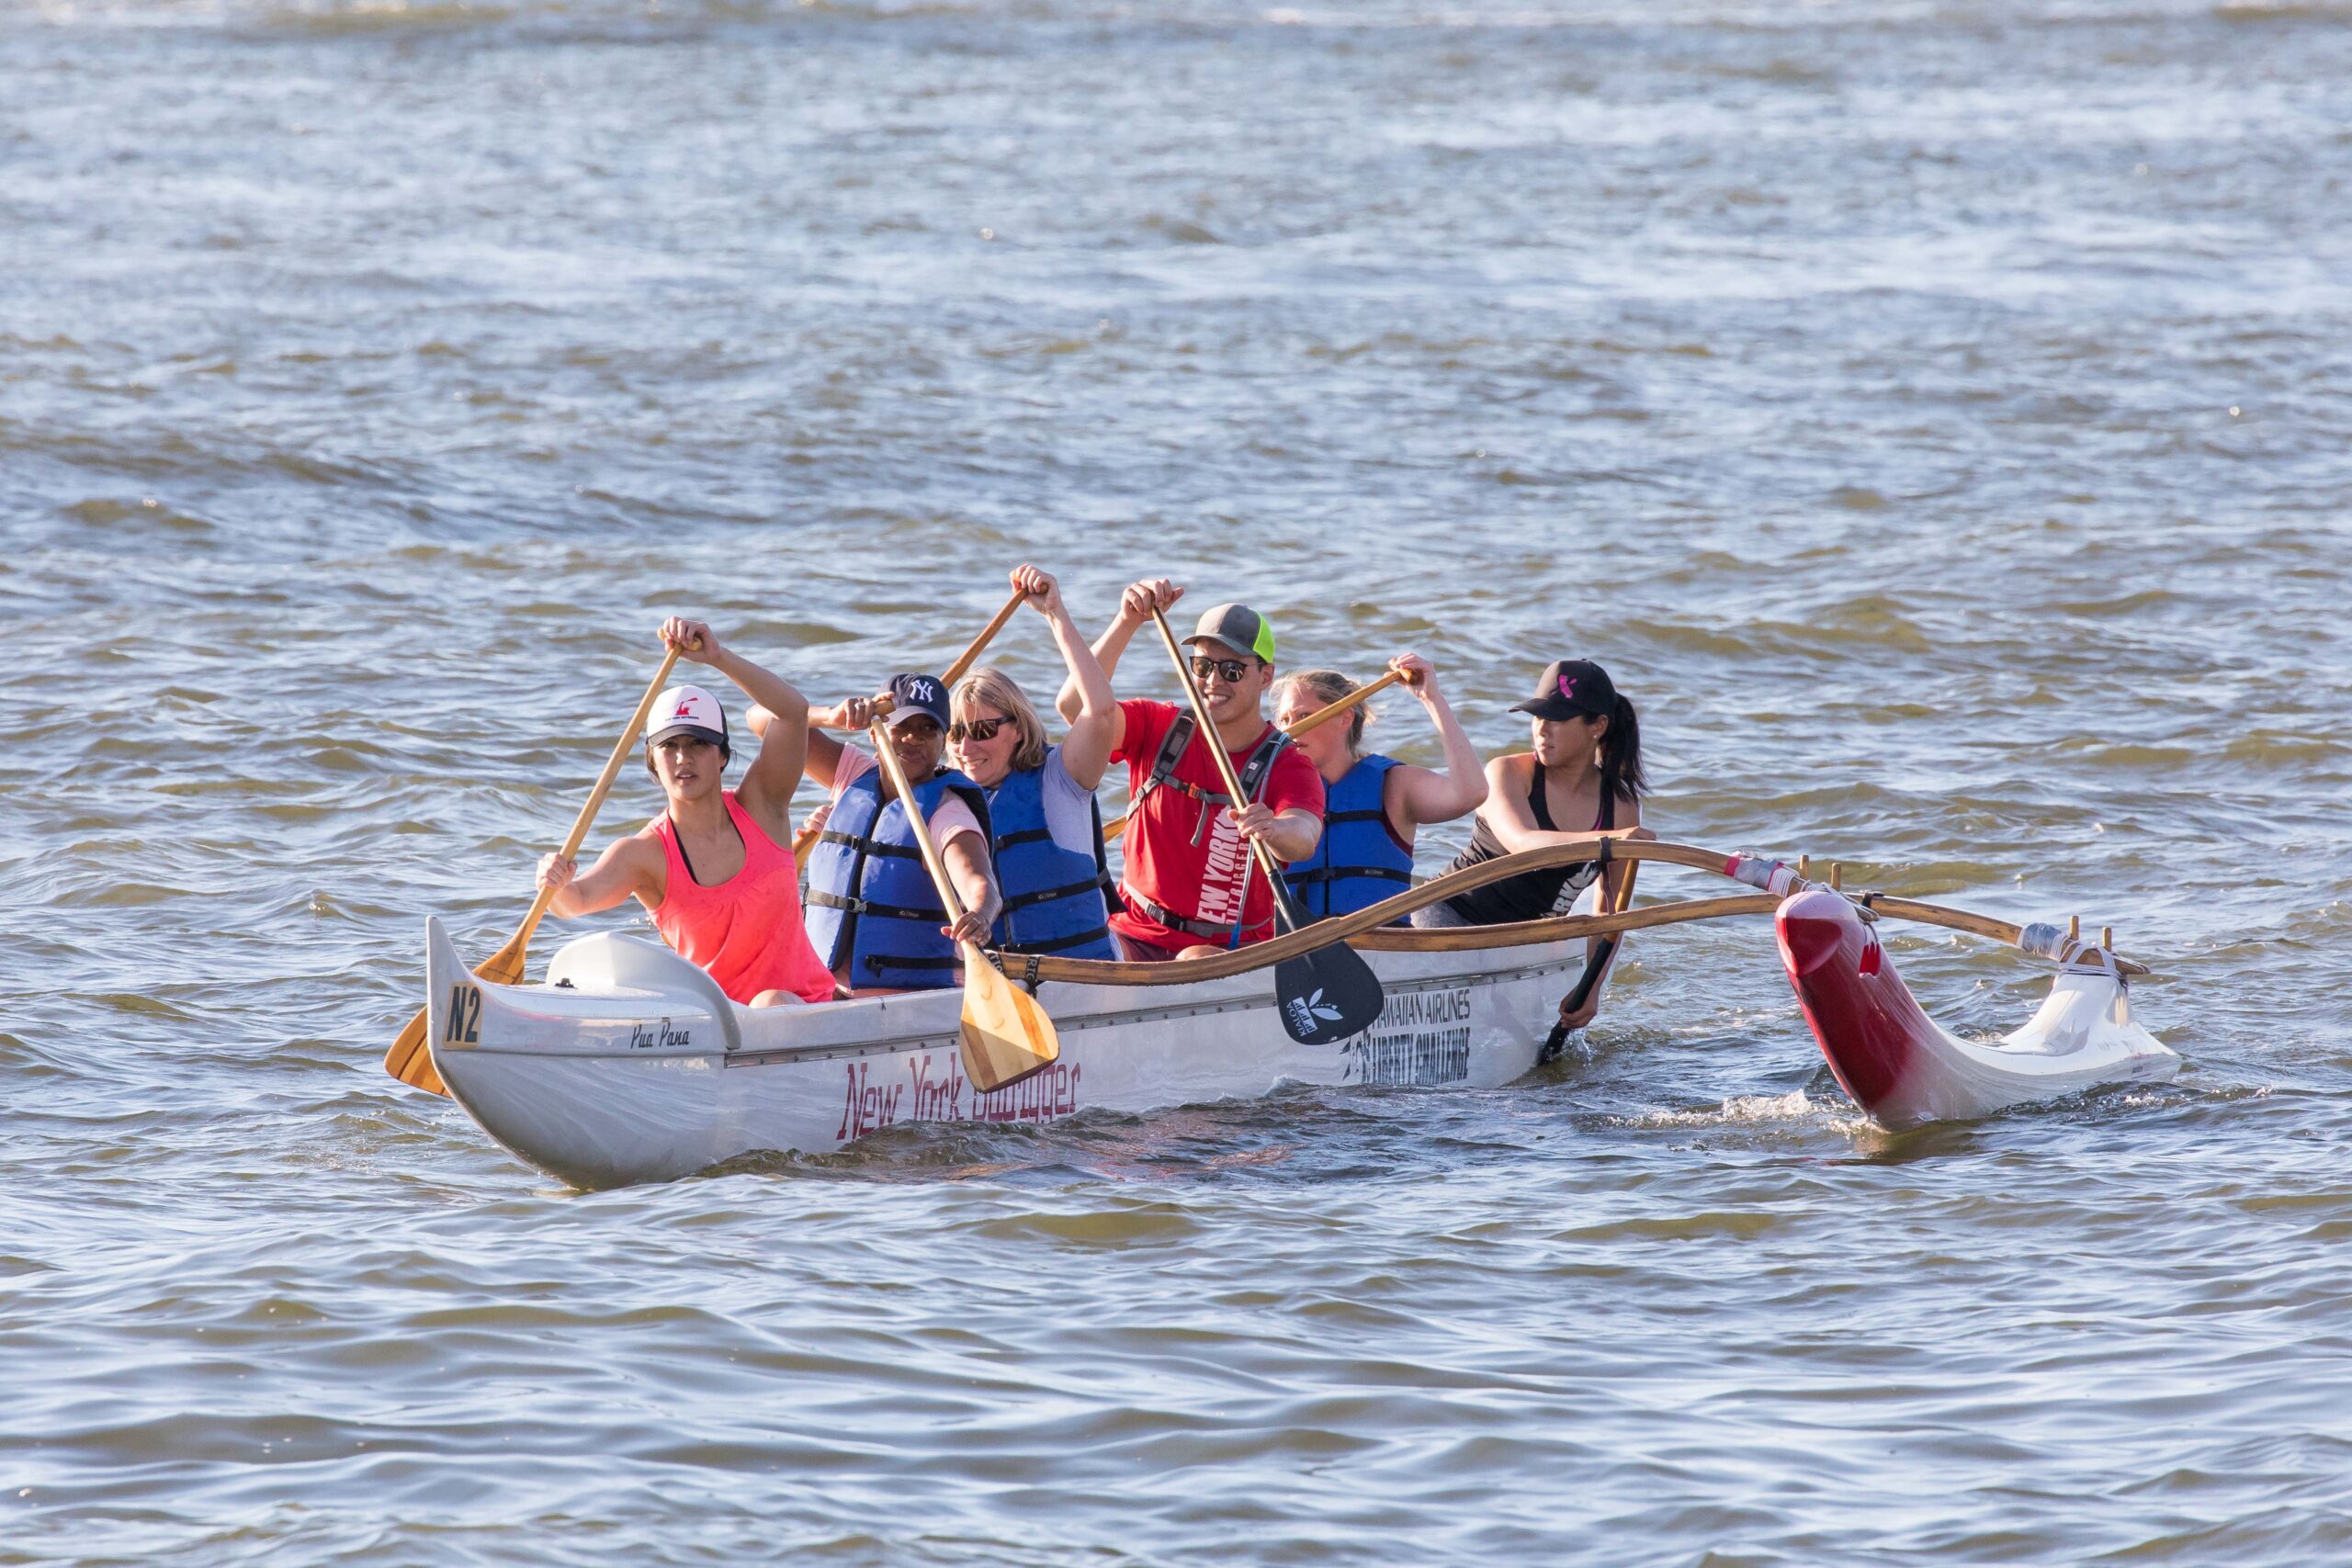 Members of Outrigger paddle their way along the Hudson River